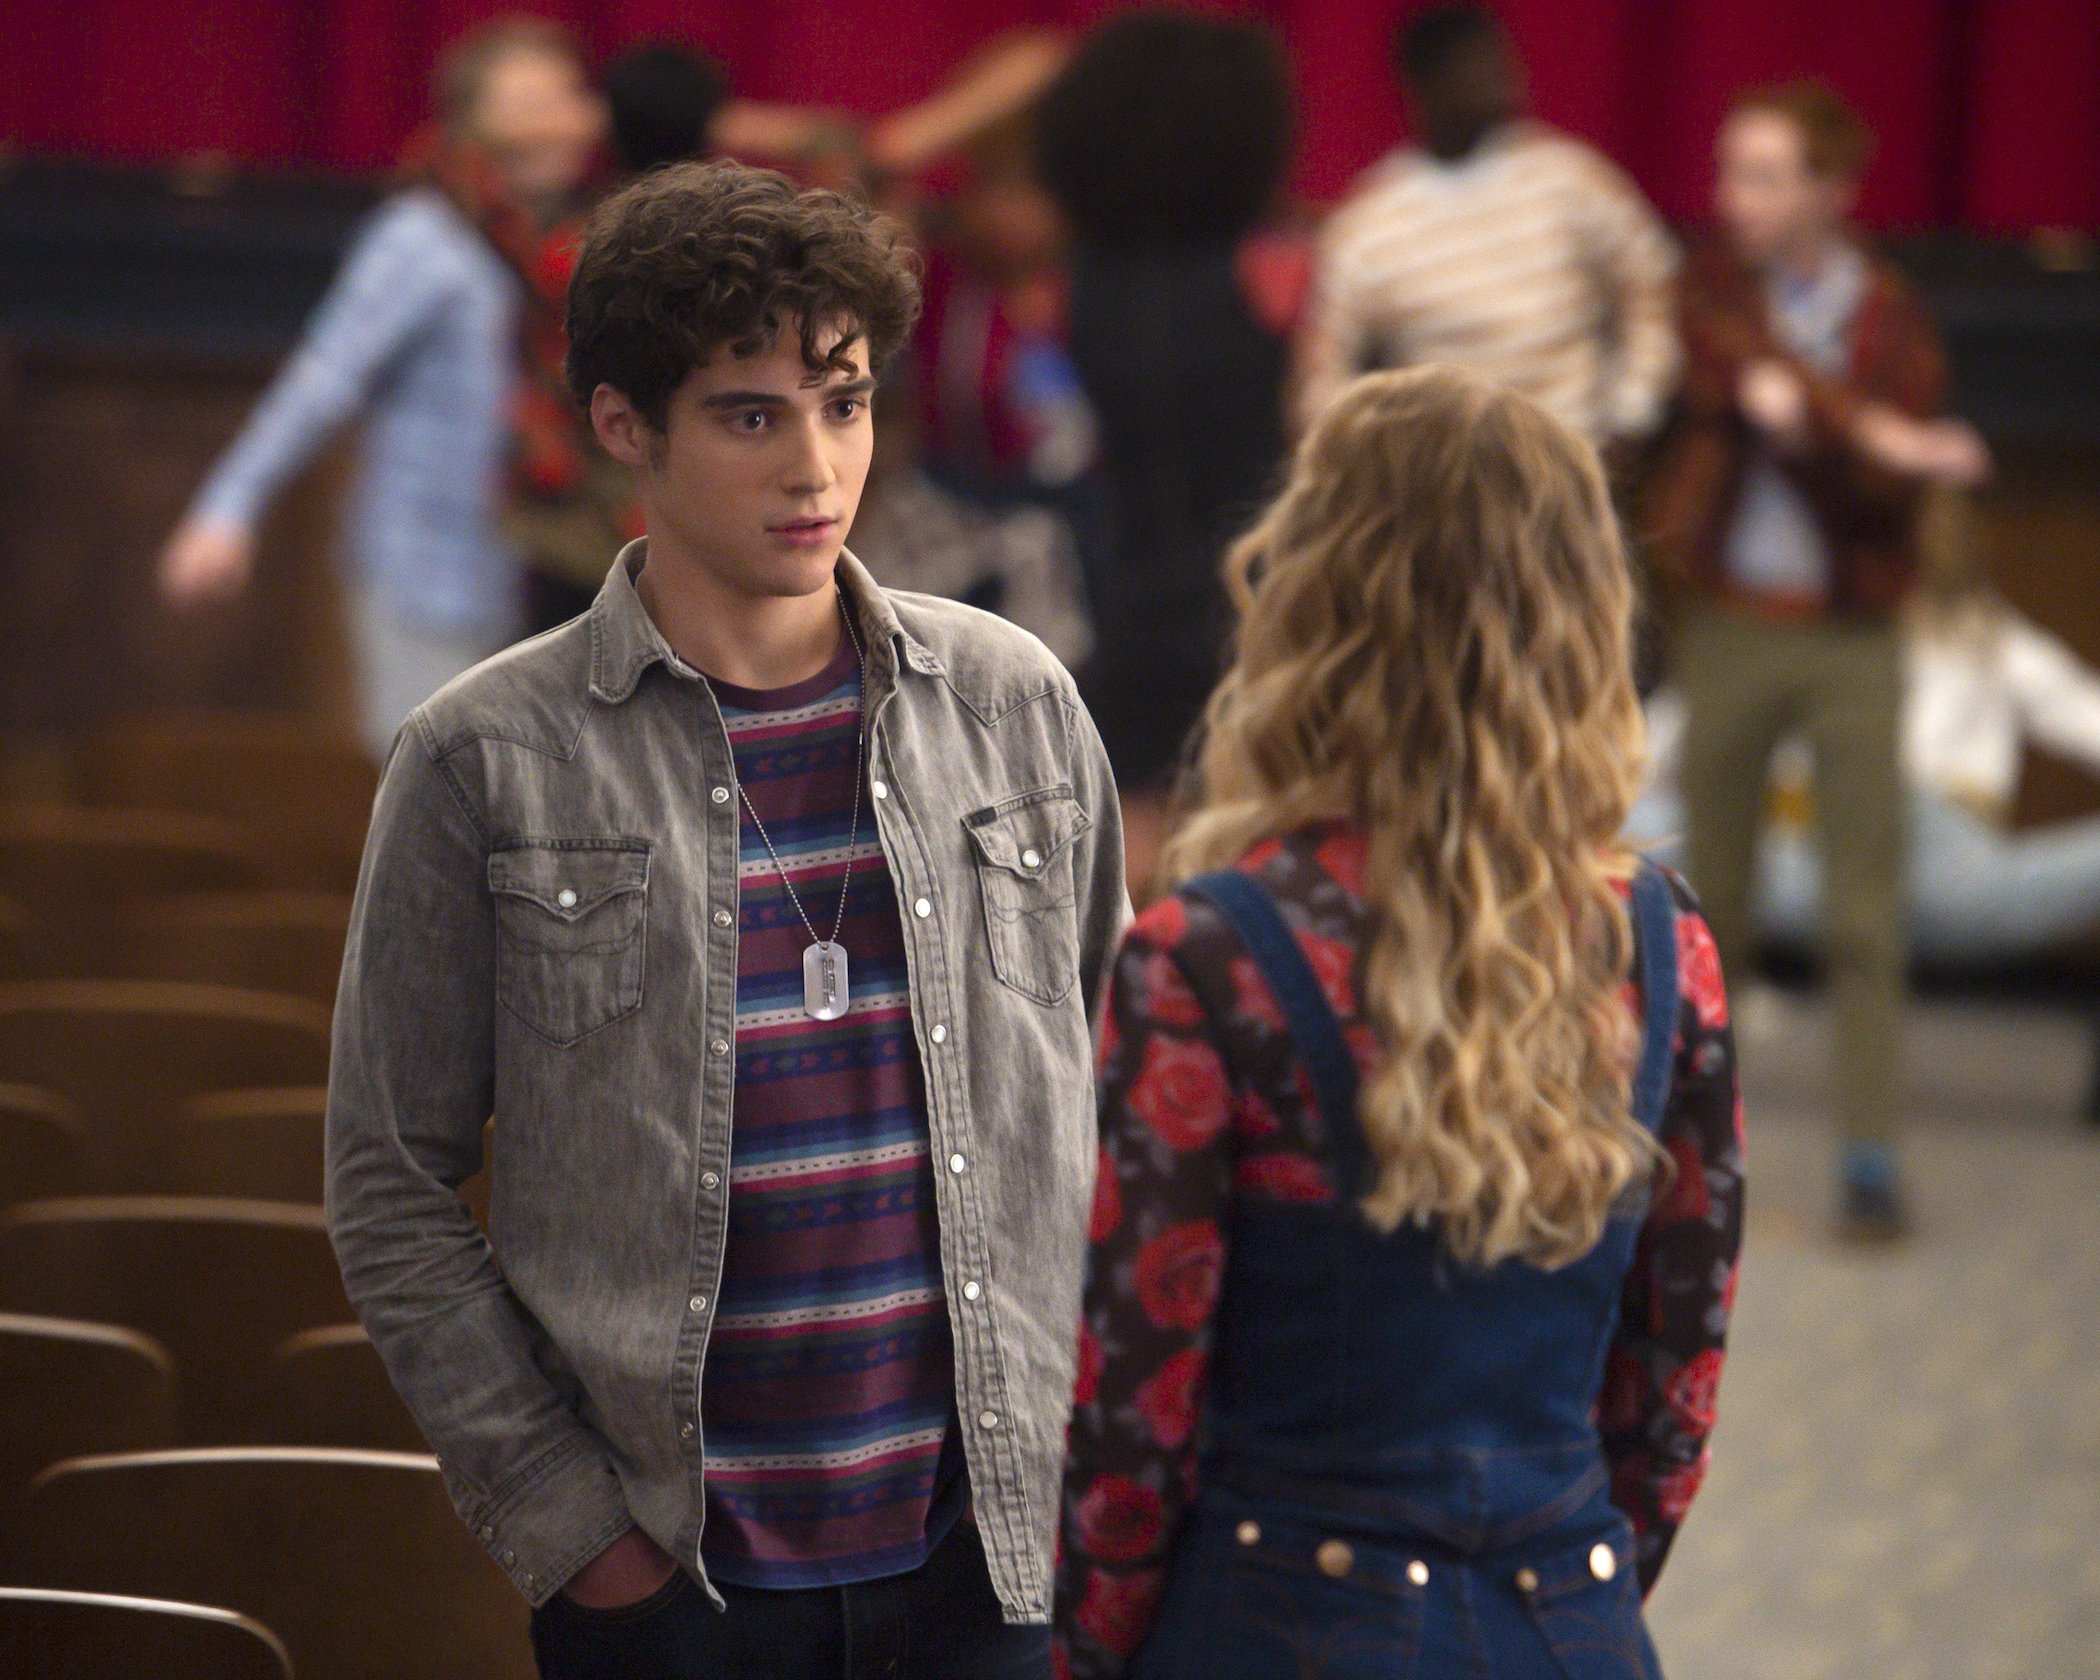 Joshua Bassett in the Disney+ original series 'High School Musical: The Musical: The Series' as Ricky Bowen, dressed in a gray jacket talking to another character